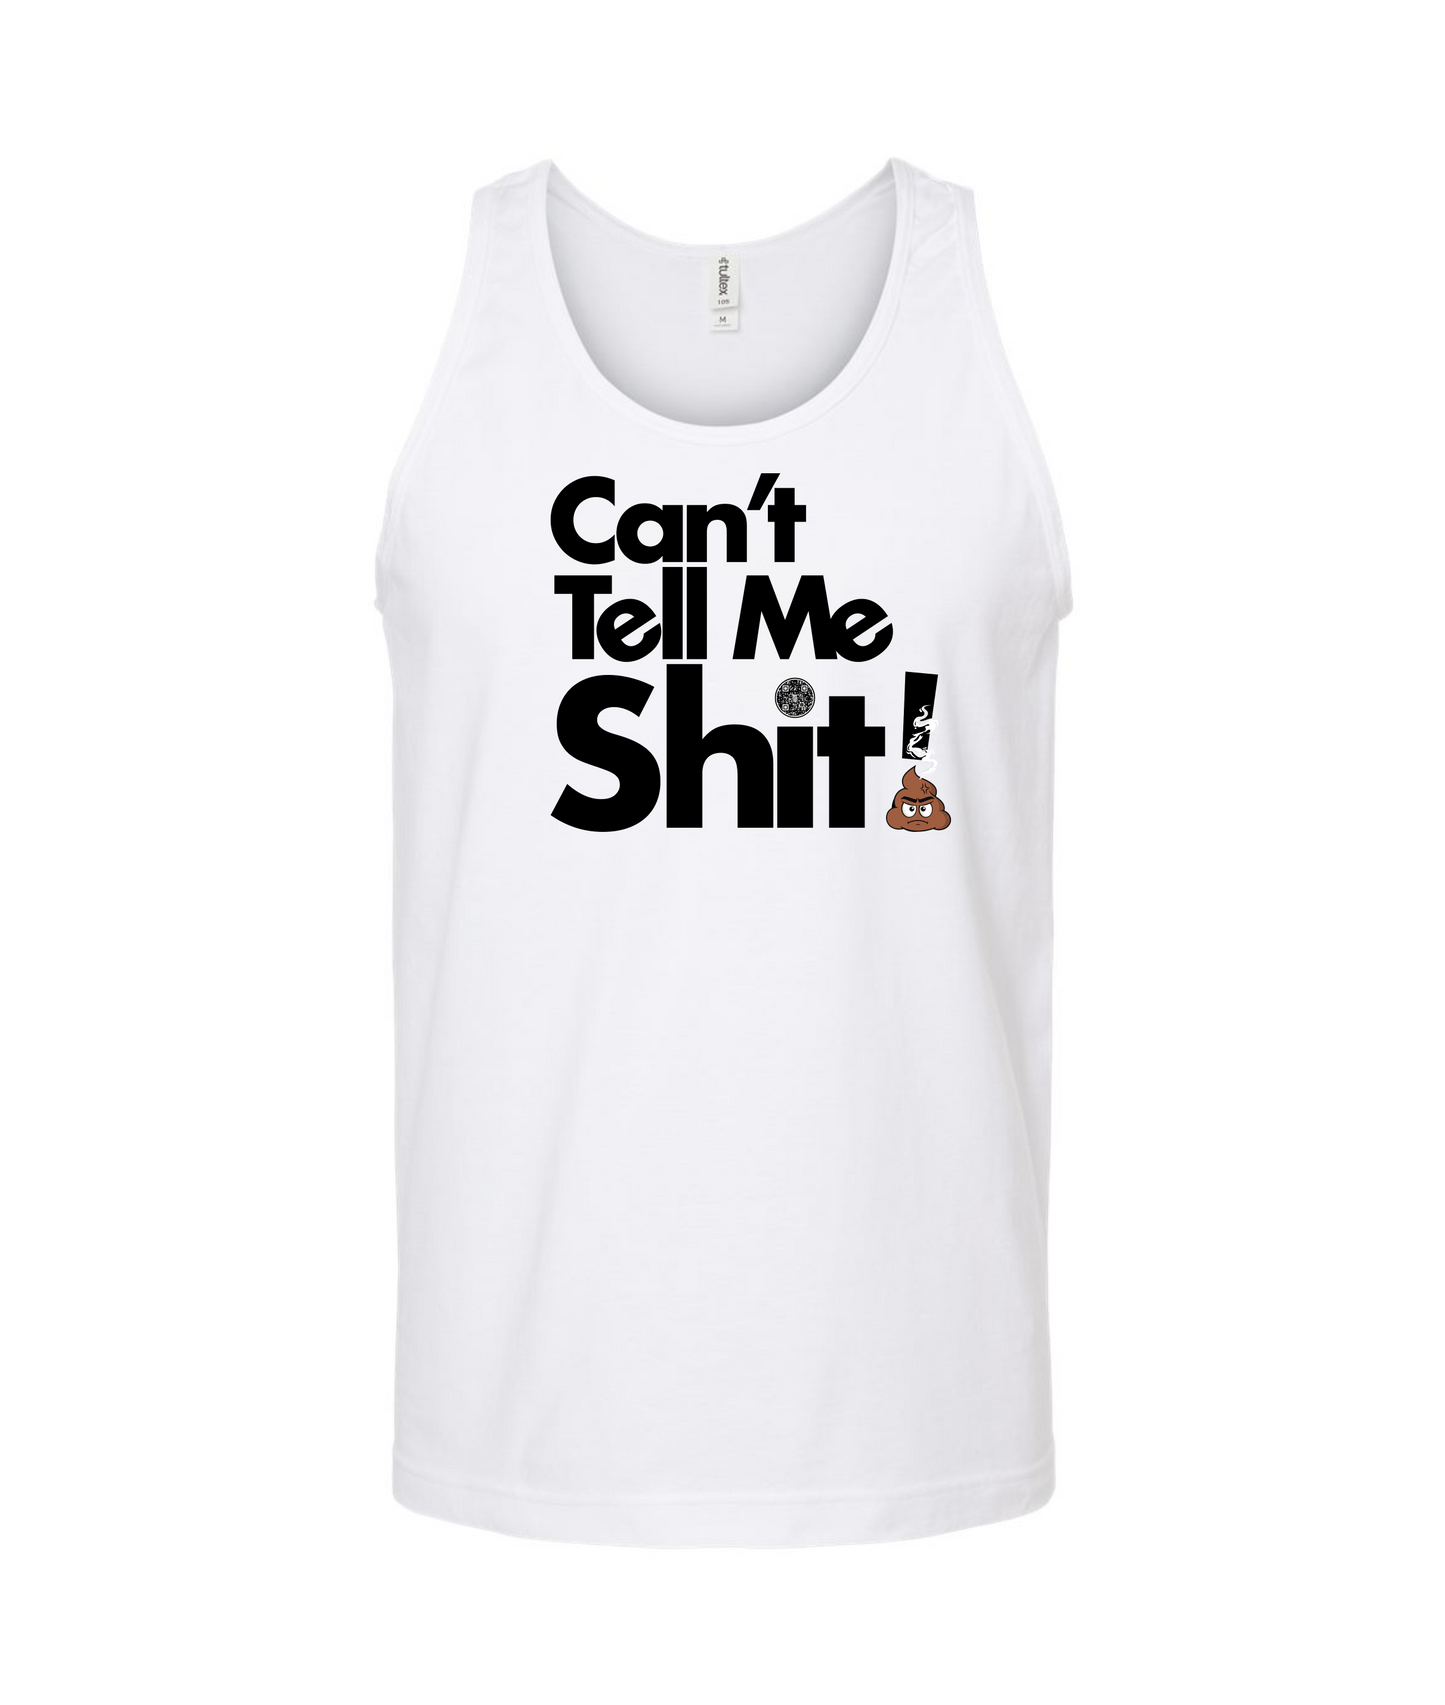 Seefor Yourself - Can't Tell Me Shit - White Tank Top